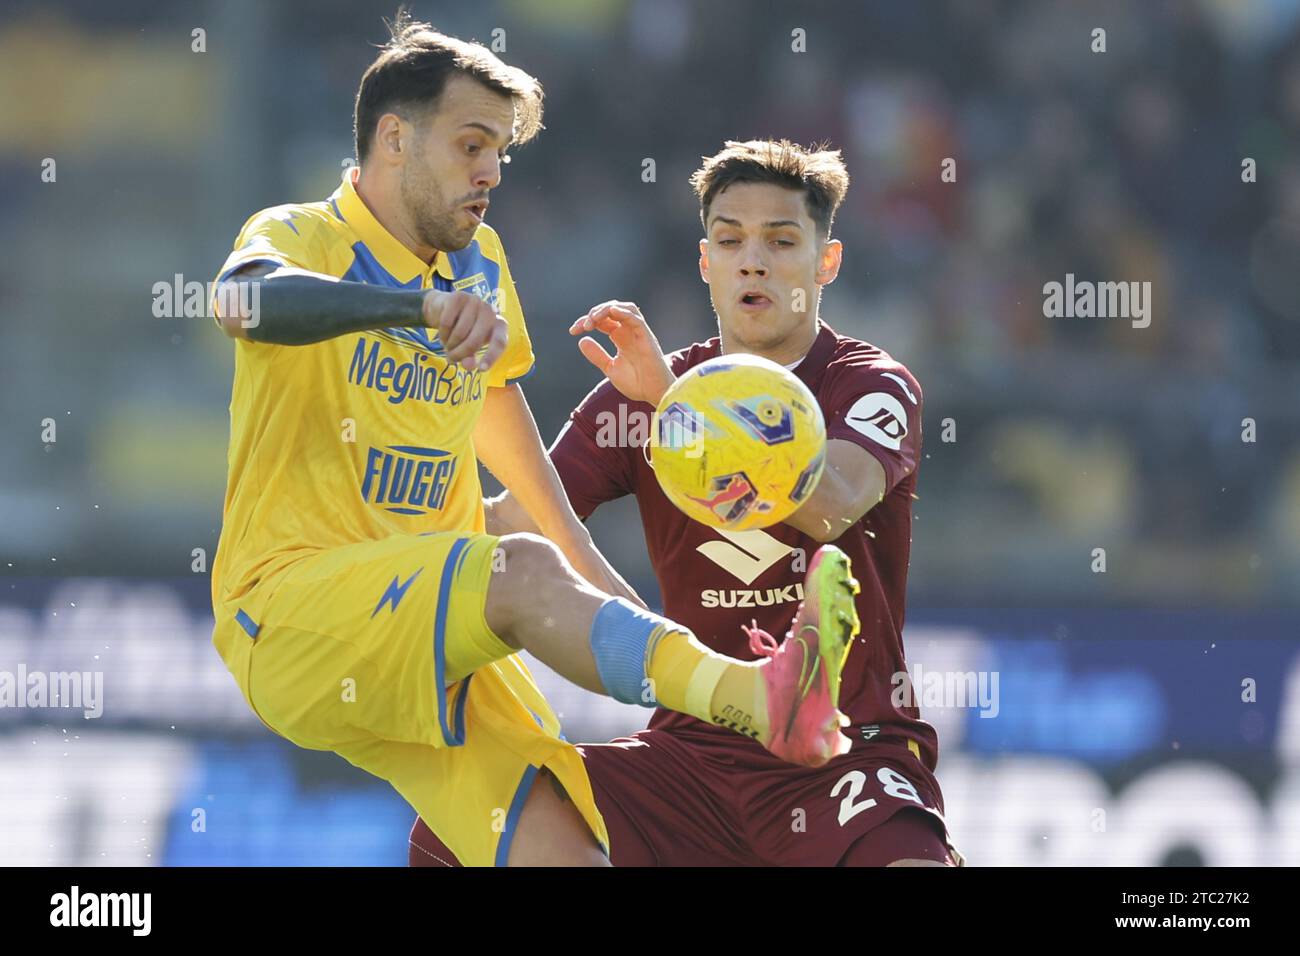 Frosinone, Italy. 10th Dec, 2023. Frosinone's Italian midfielder Francesco Gelli challenges for the ball with Torino's Italian midfielder Samuele Ricci during the Serie A football match between Frosinone Calcio vs Torino at the Benito Stirpe stadium in Frosinone, Italy on December 10, 2023. Credit: Independent Photo Agency/Alamy Live News Stock Photo